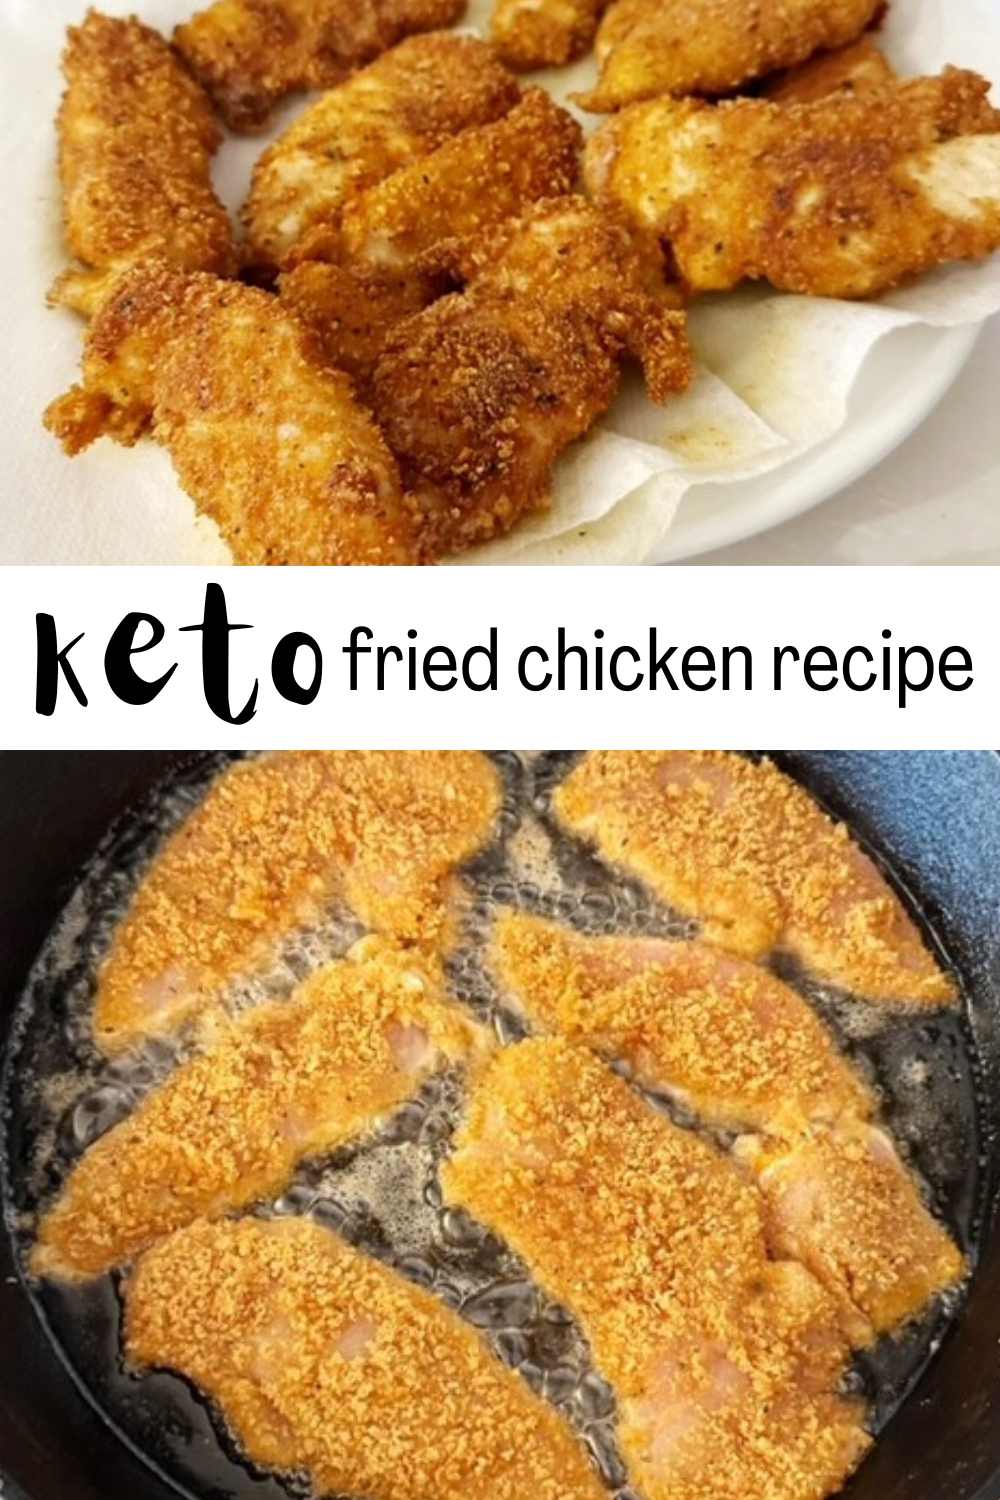 Trying to maintain a keto diet, but miss fried chicken? This keto fried chicken recipe will help and it's delicious!